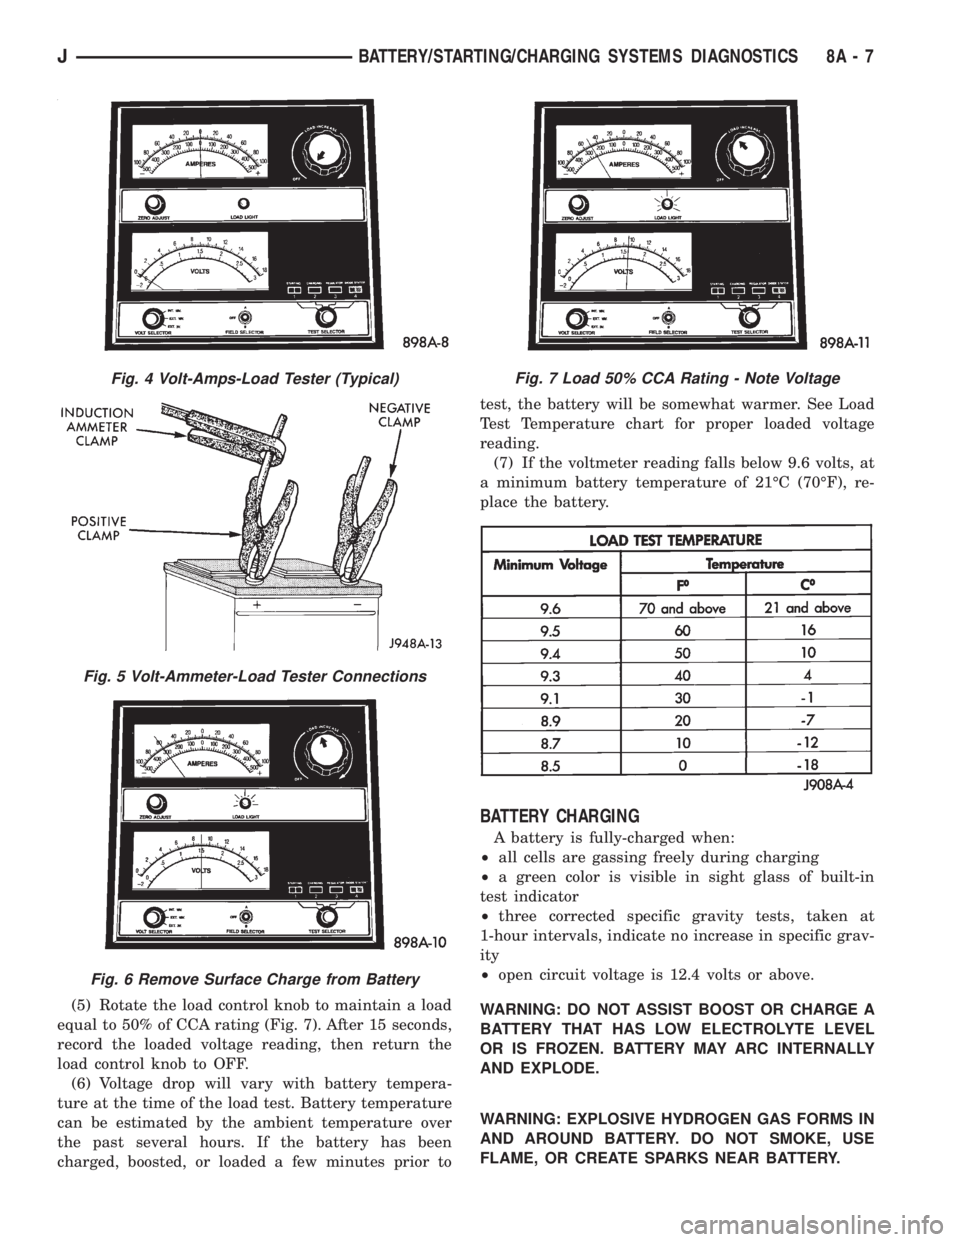 JEEP XJ 1995  Service And Repair Manual (5) Rotate the load control knob to maintain a load
equal to 50% of CCA rating (Fig. 7). After 15 seconds,
record the loaded voltage reading, then return the
load control knob to OFF.
(6) Voltage drop